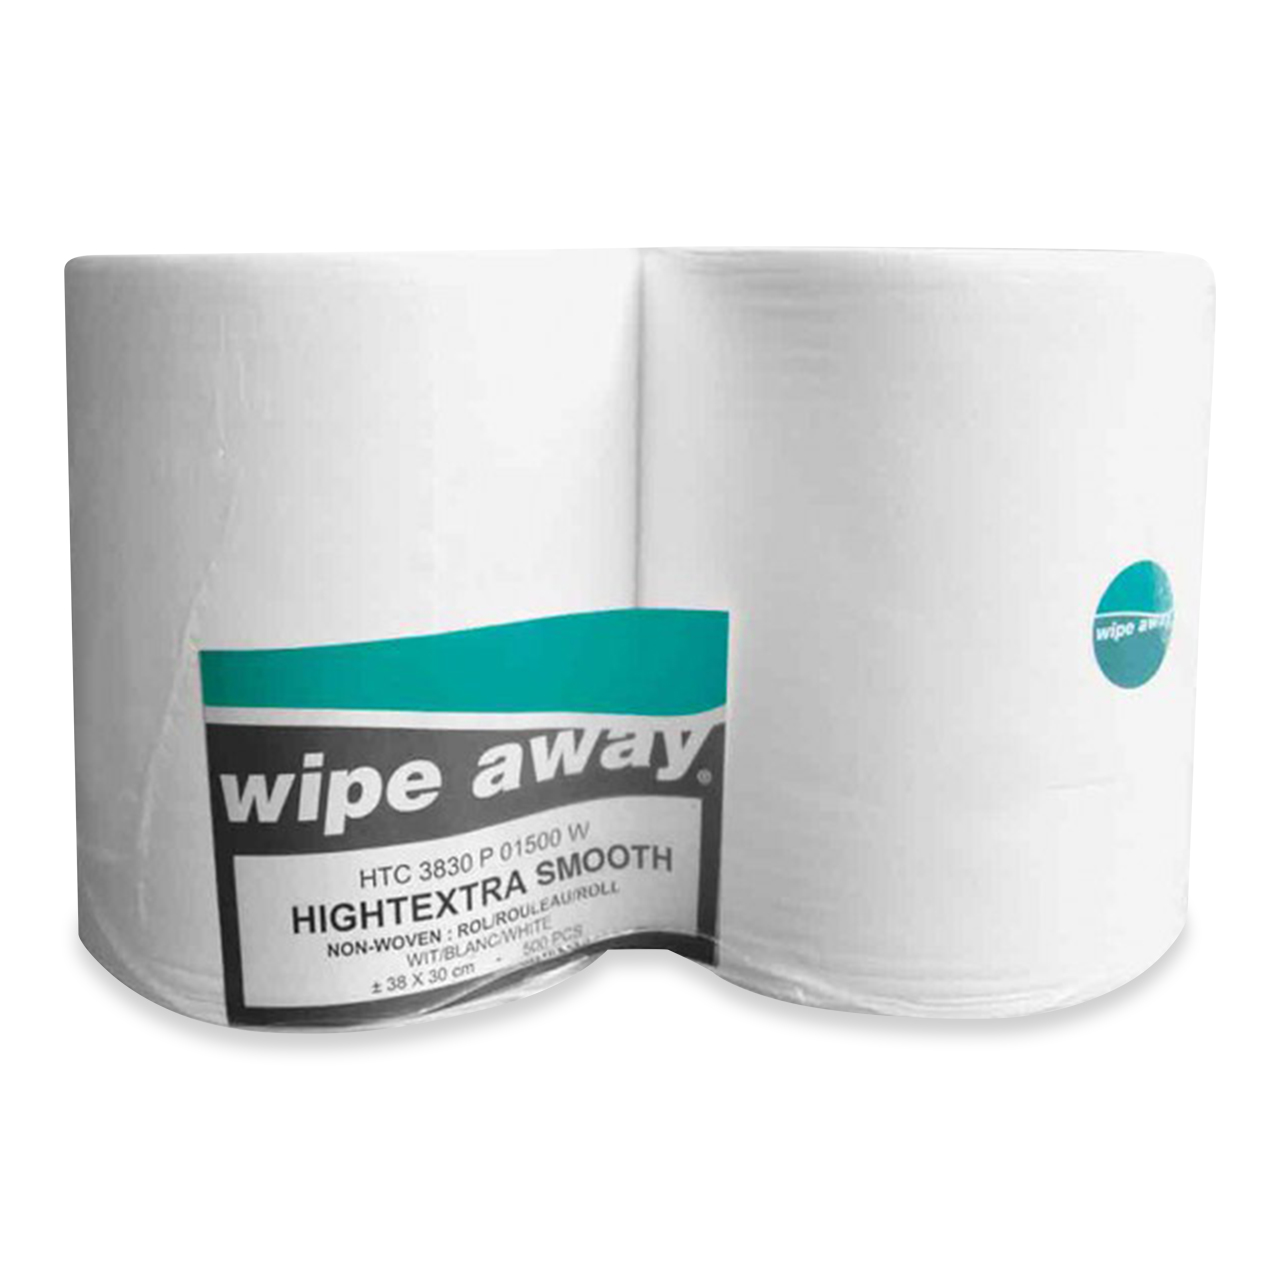 wipe away HIGHTEXTRA SMOOTH Rolle